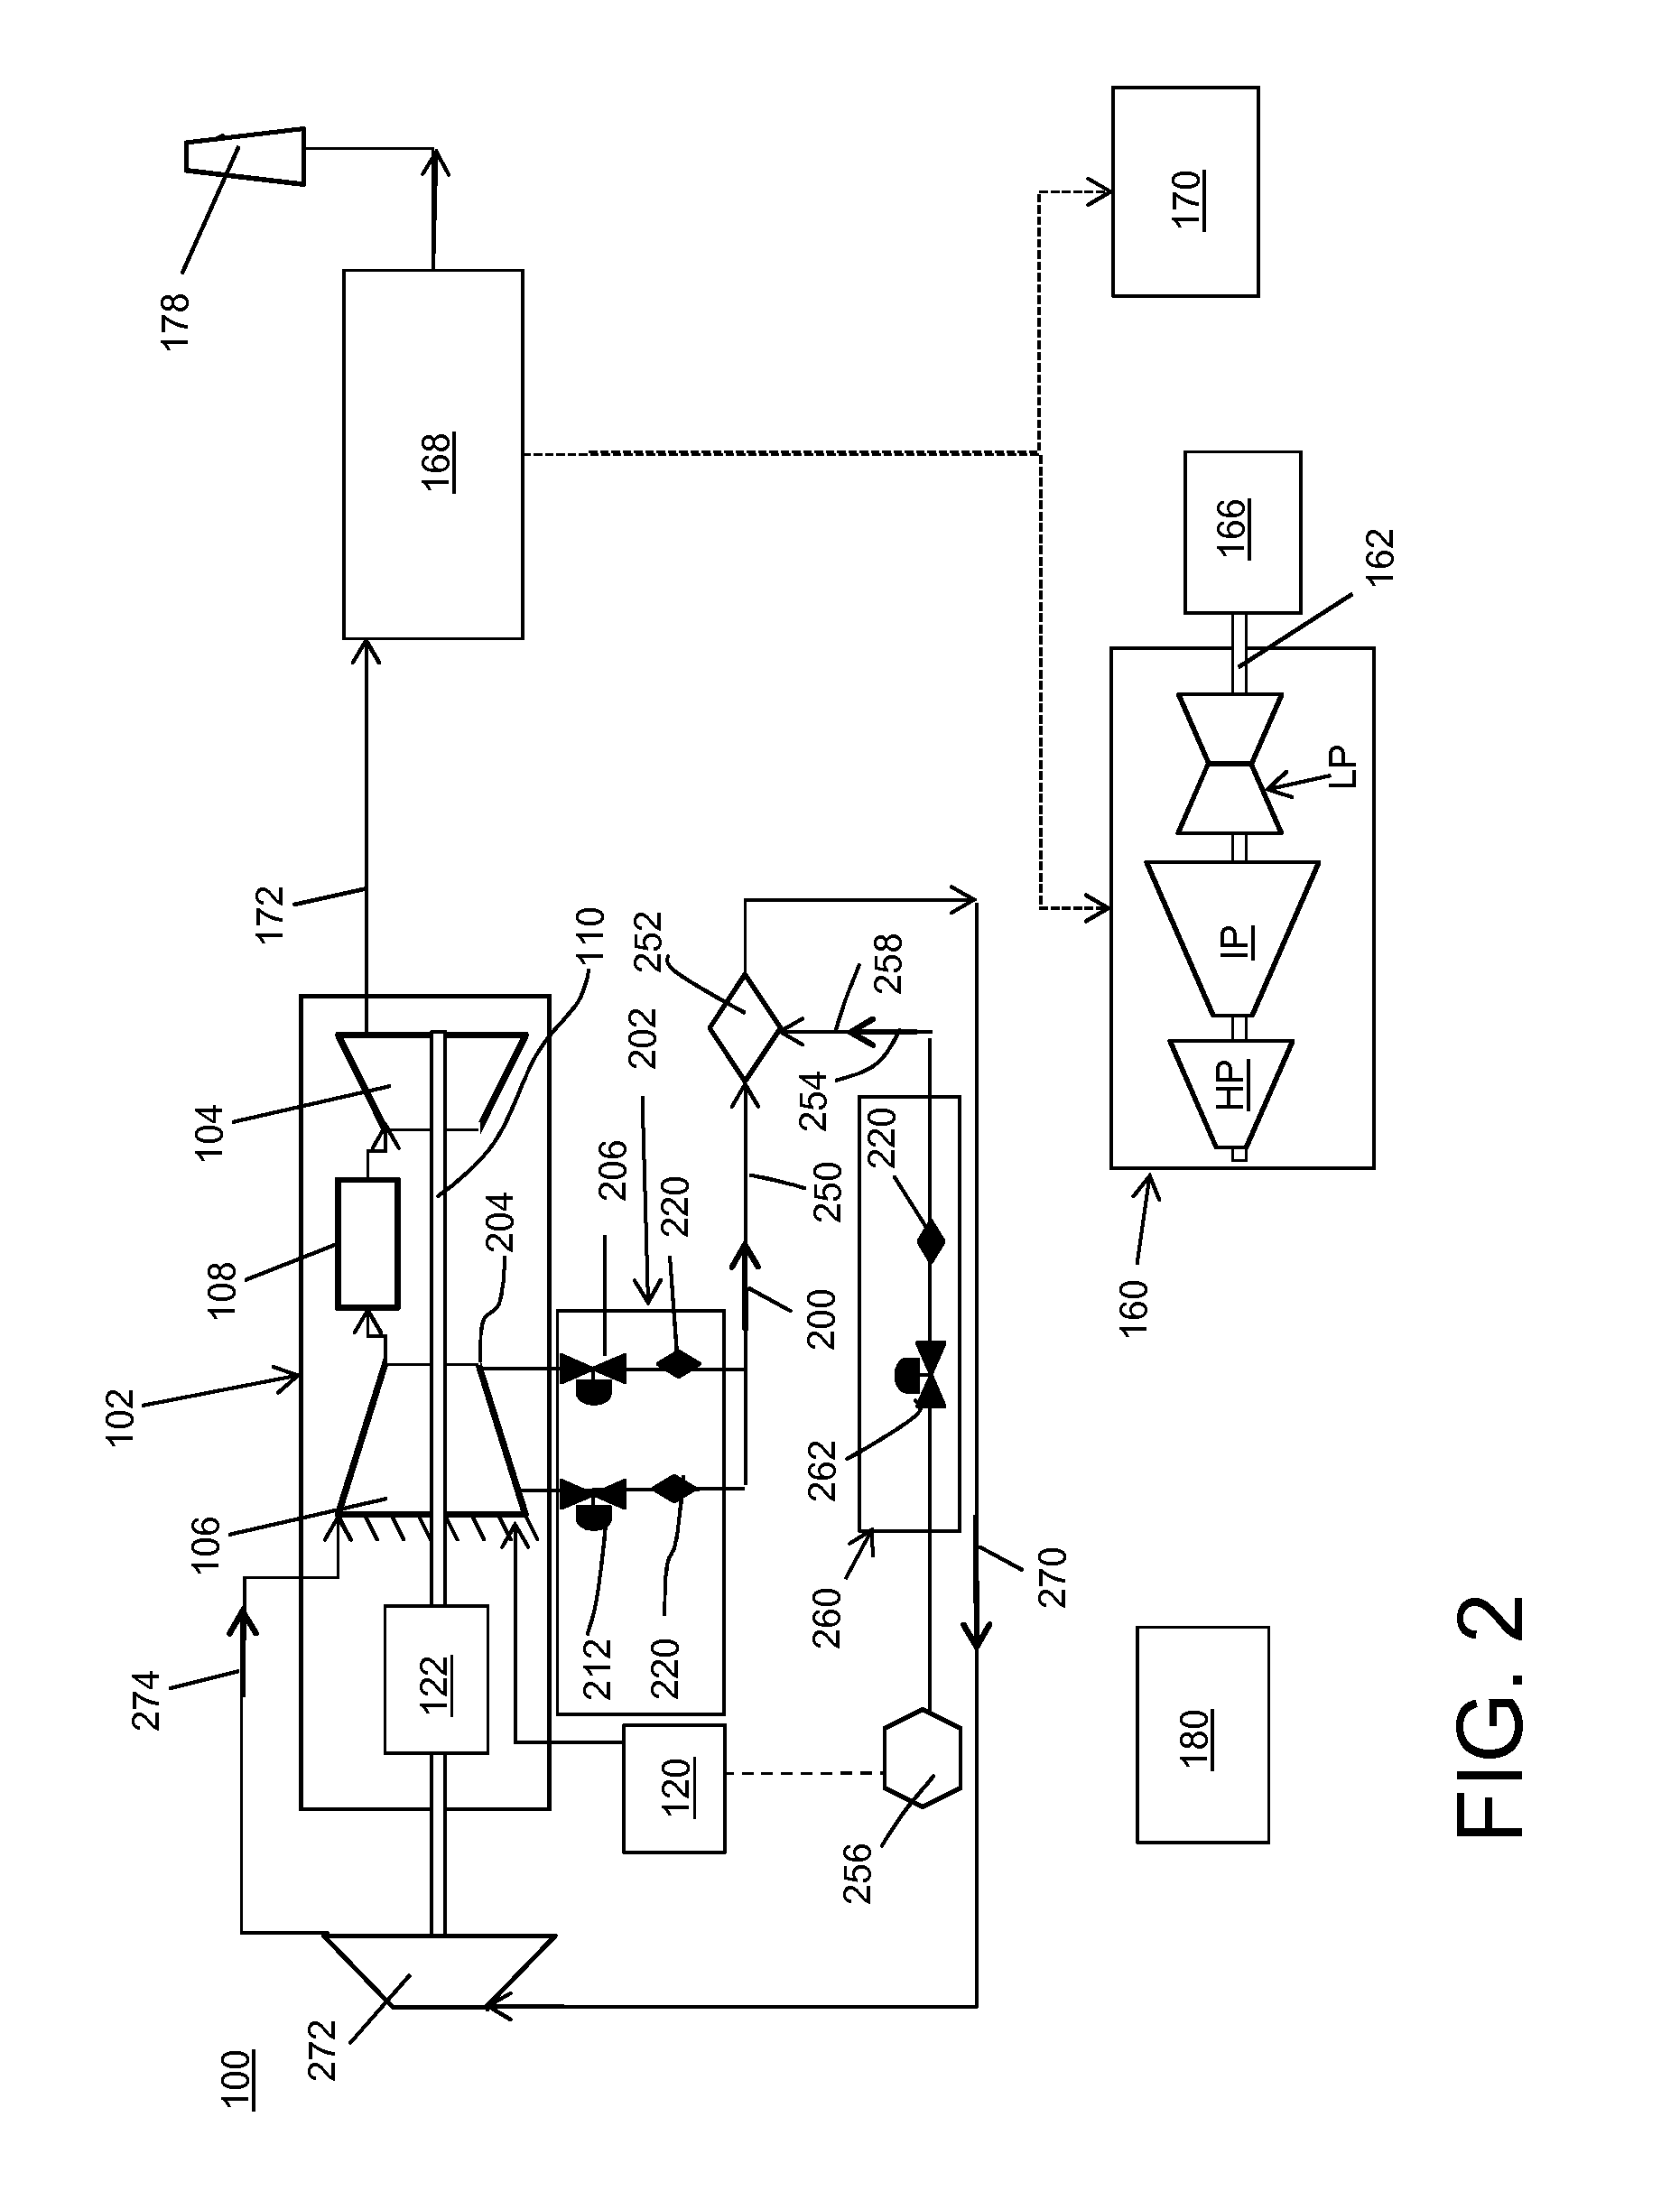 Power generation system having compressor creating excess air flow and turbo-expander using same